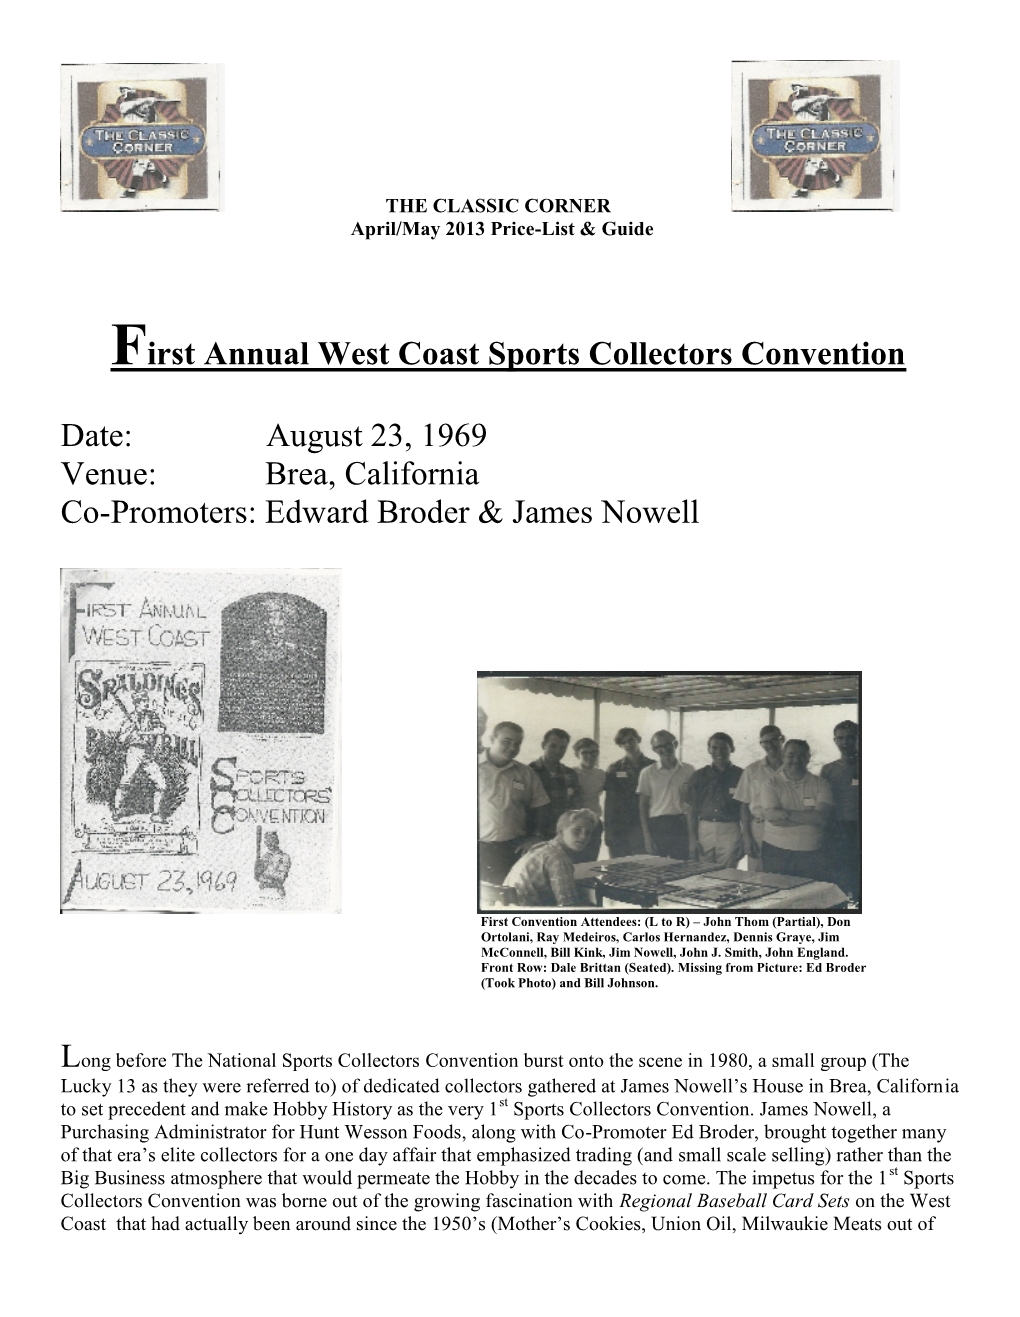 First Annual West Coast Sports Collectors Convention